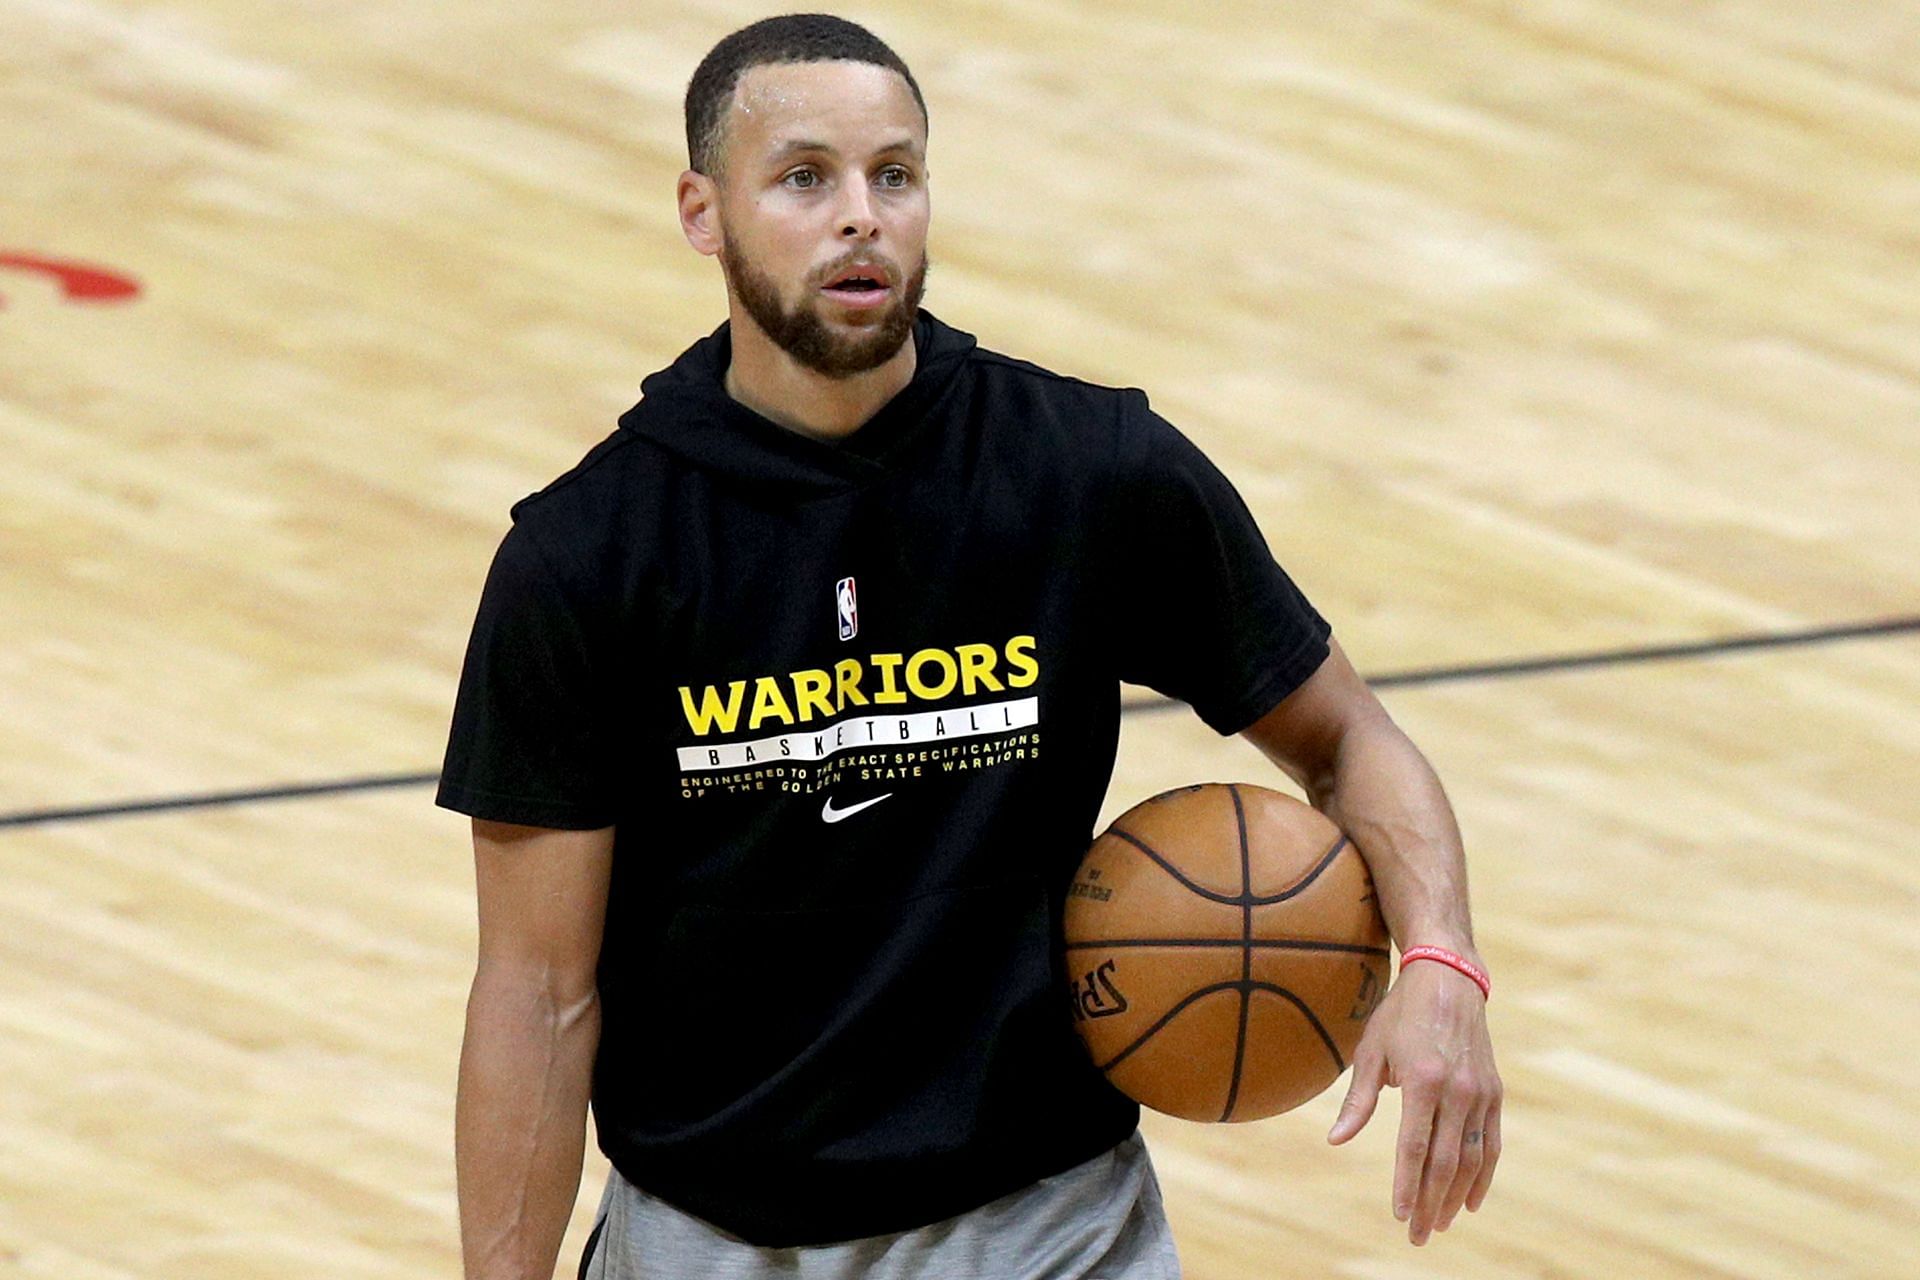 Stephen Curry of the Golden State Warriors was third in MVP voting last season.